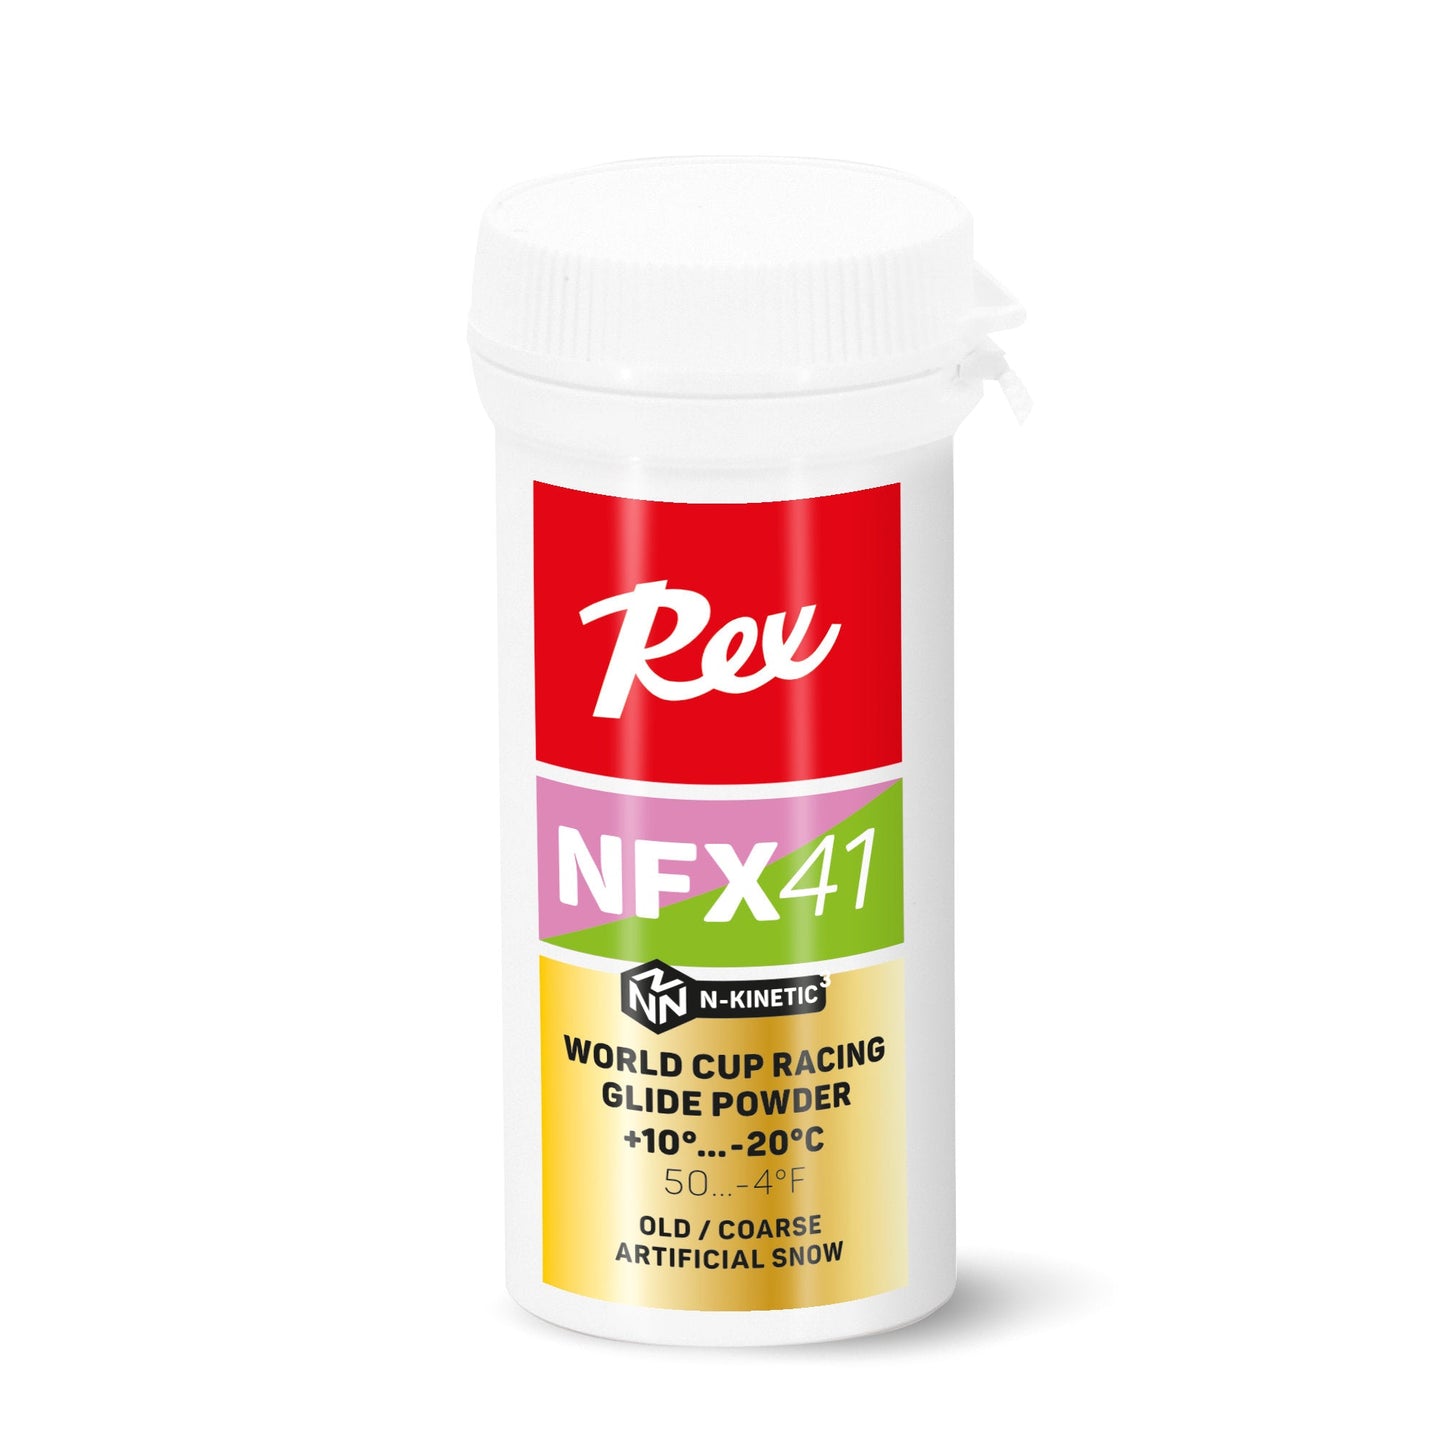 A product picture of the Rex Wax NFX41 Pink/Green UHW Powder